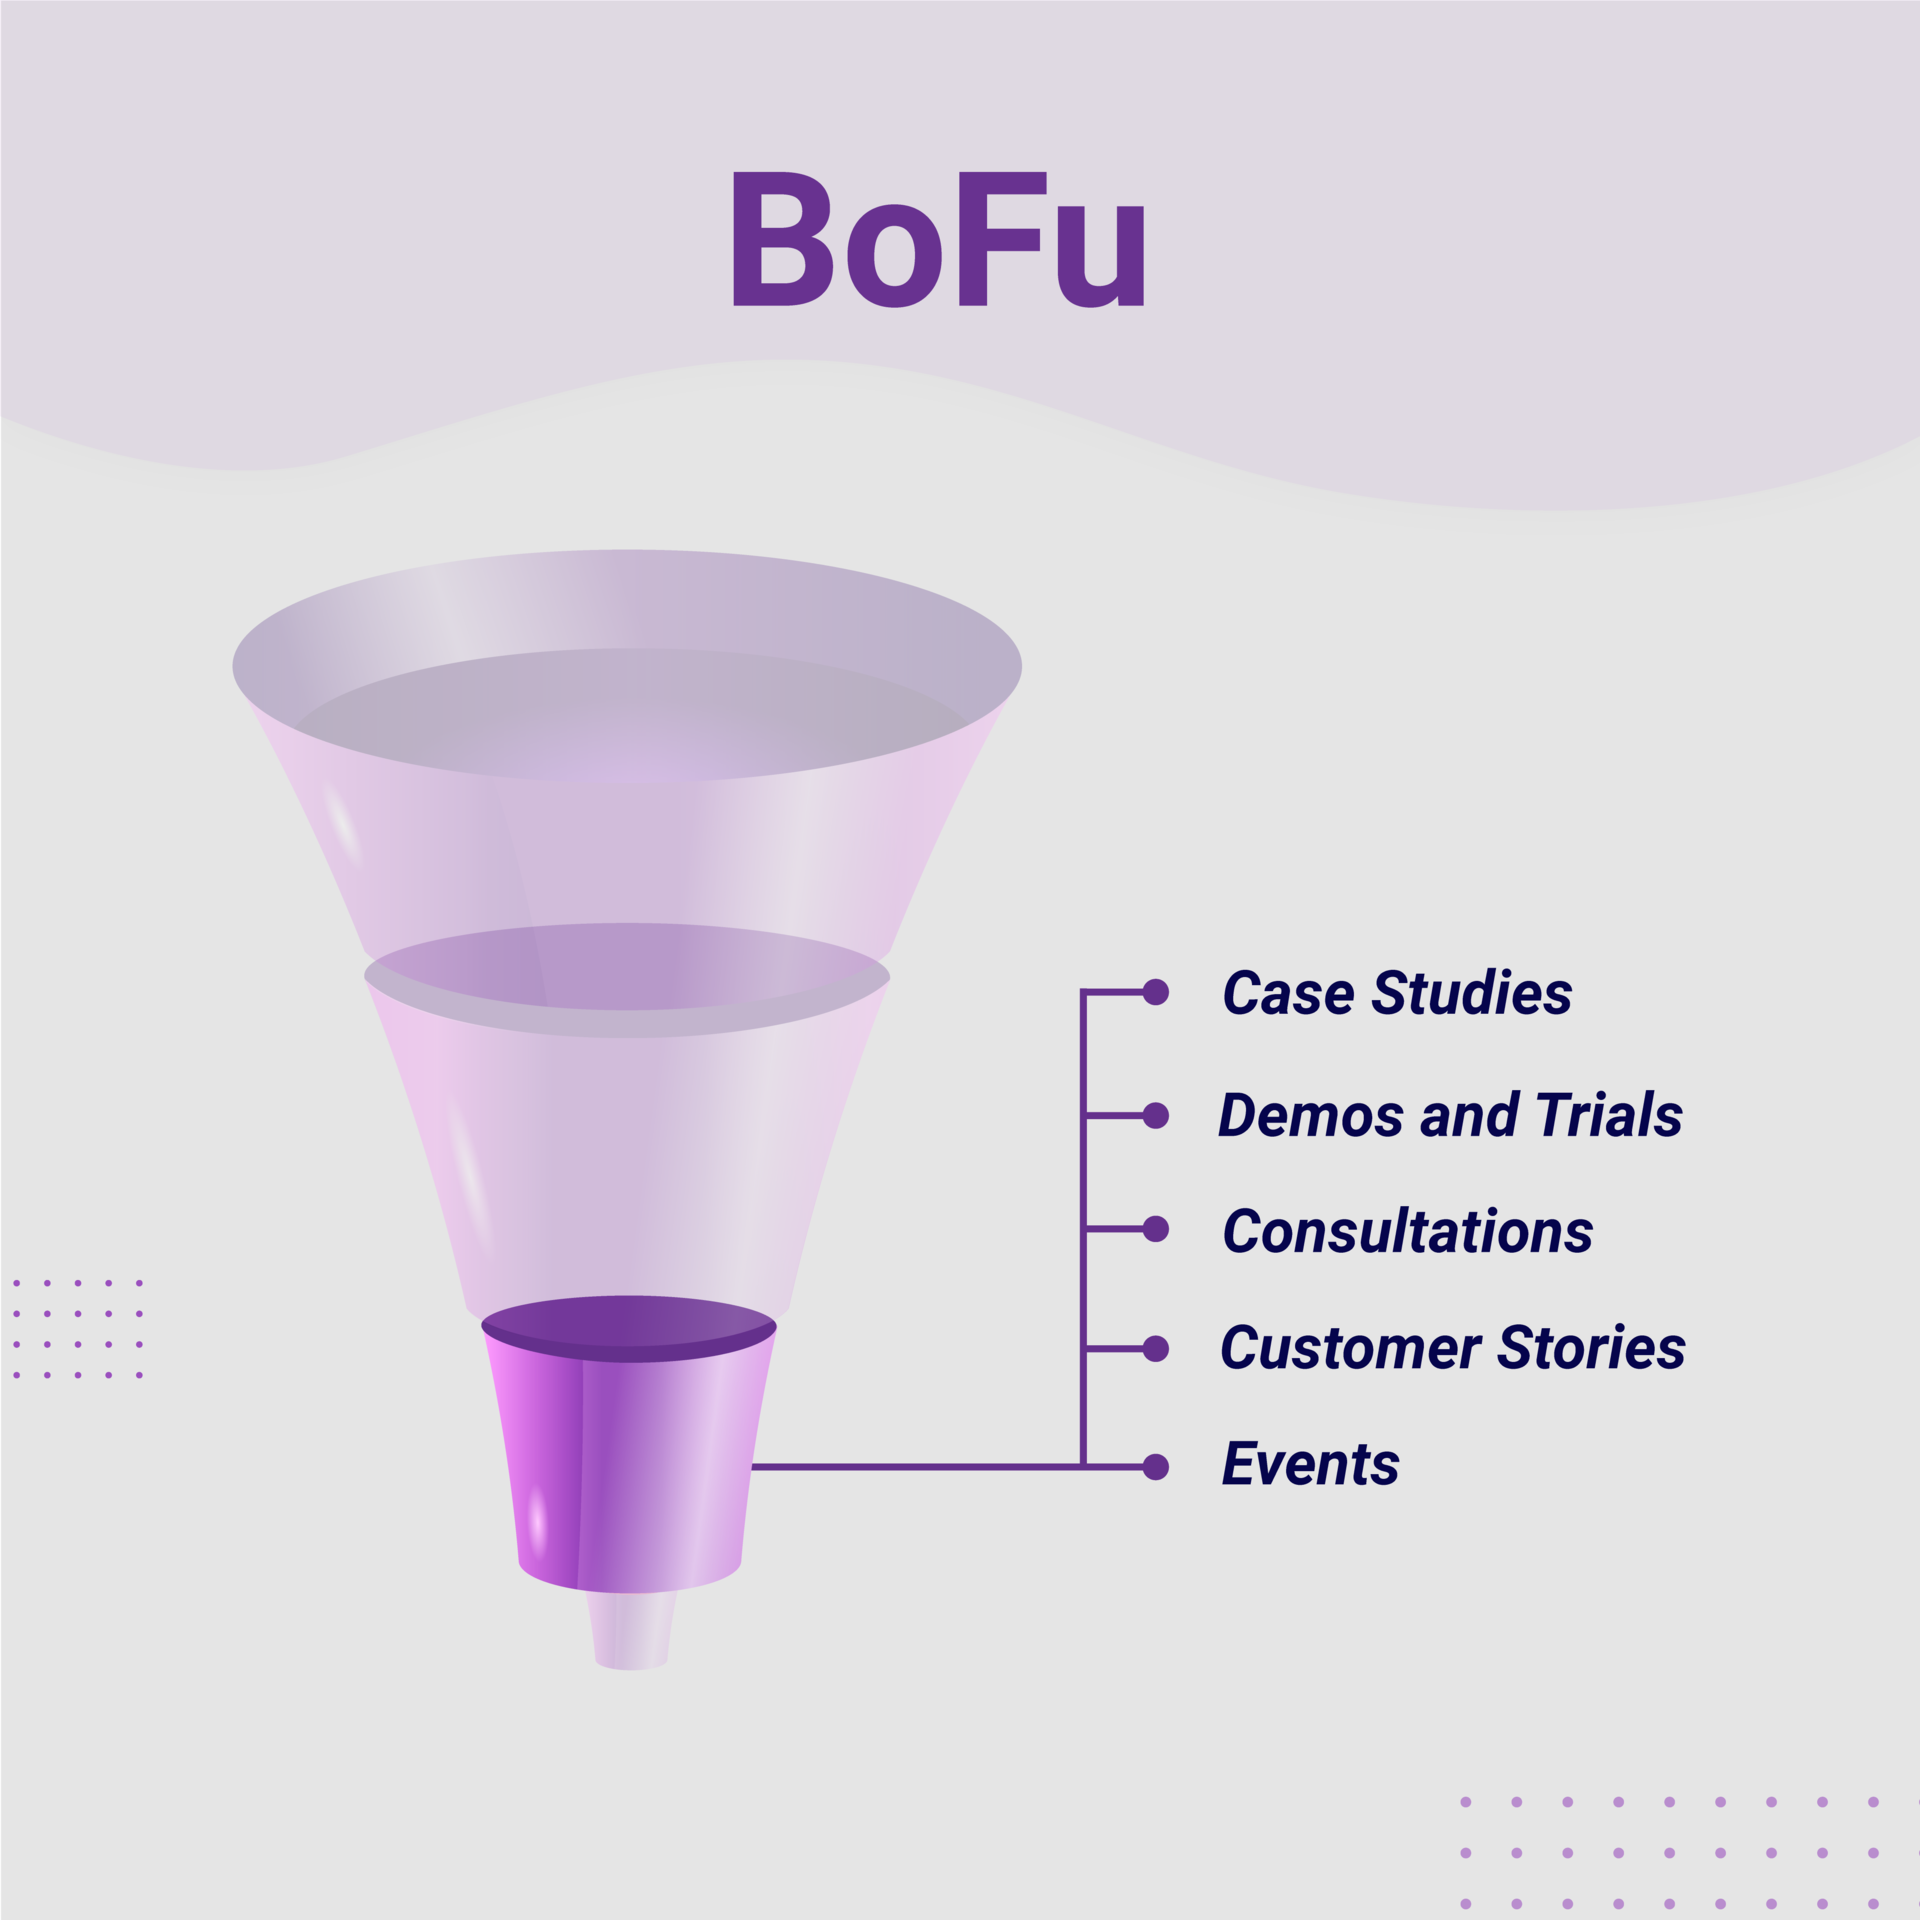 BoFu- Bottom of the Sales Funnel